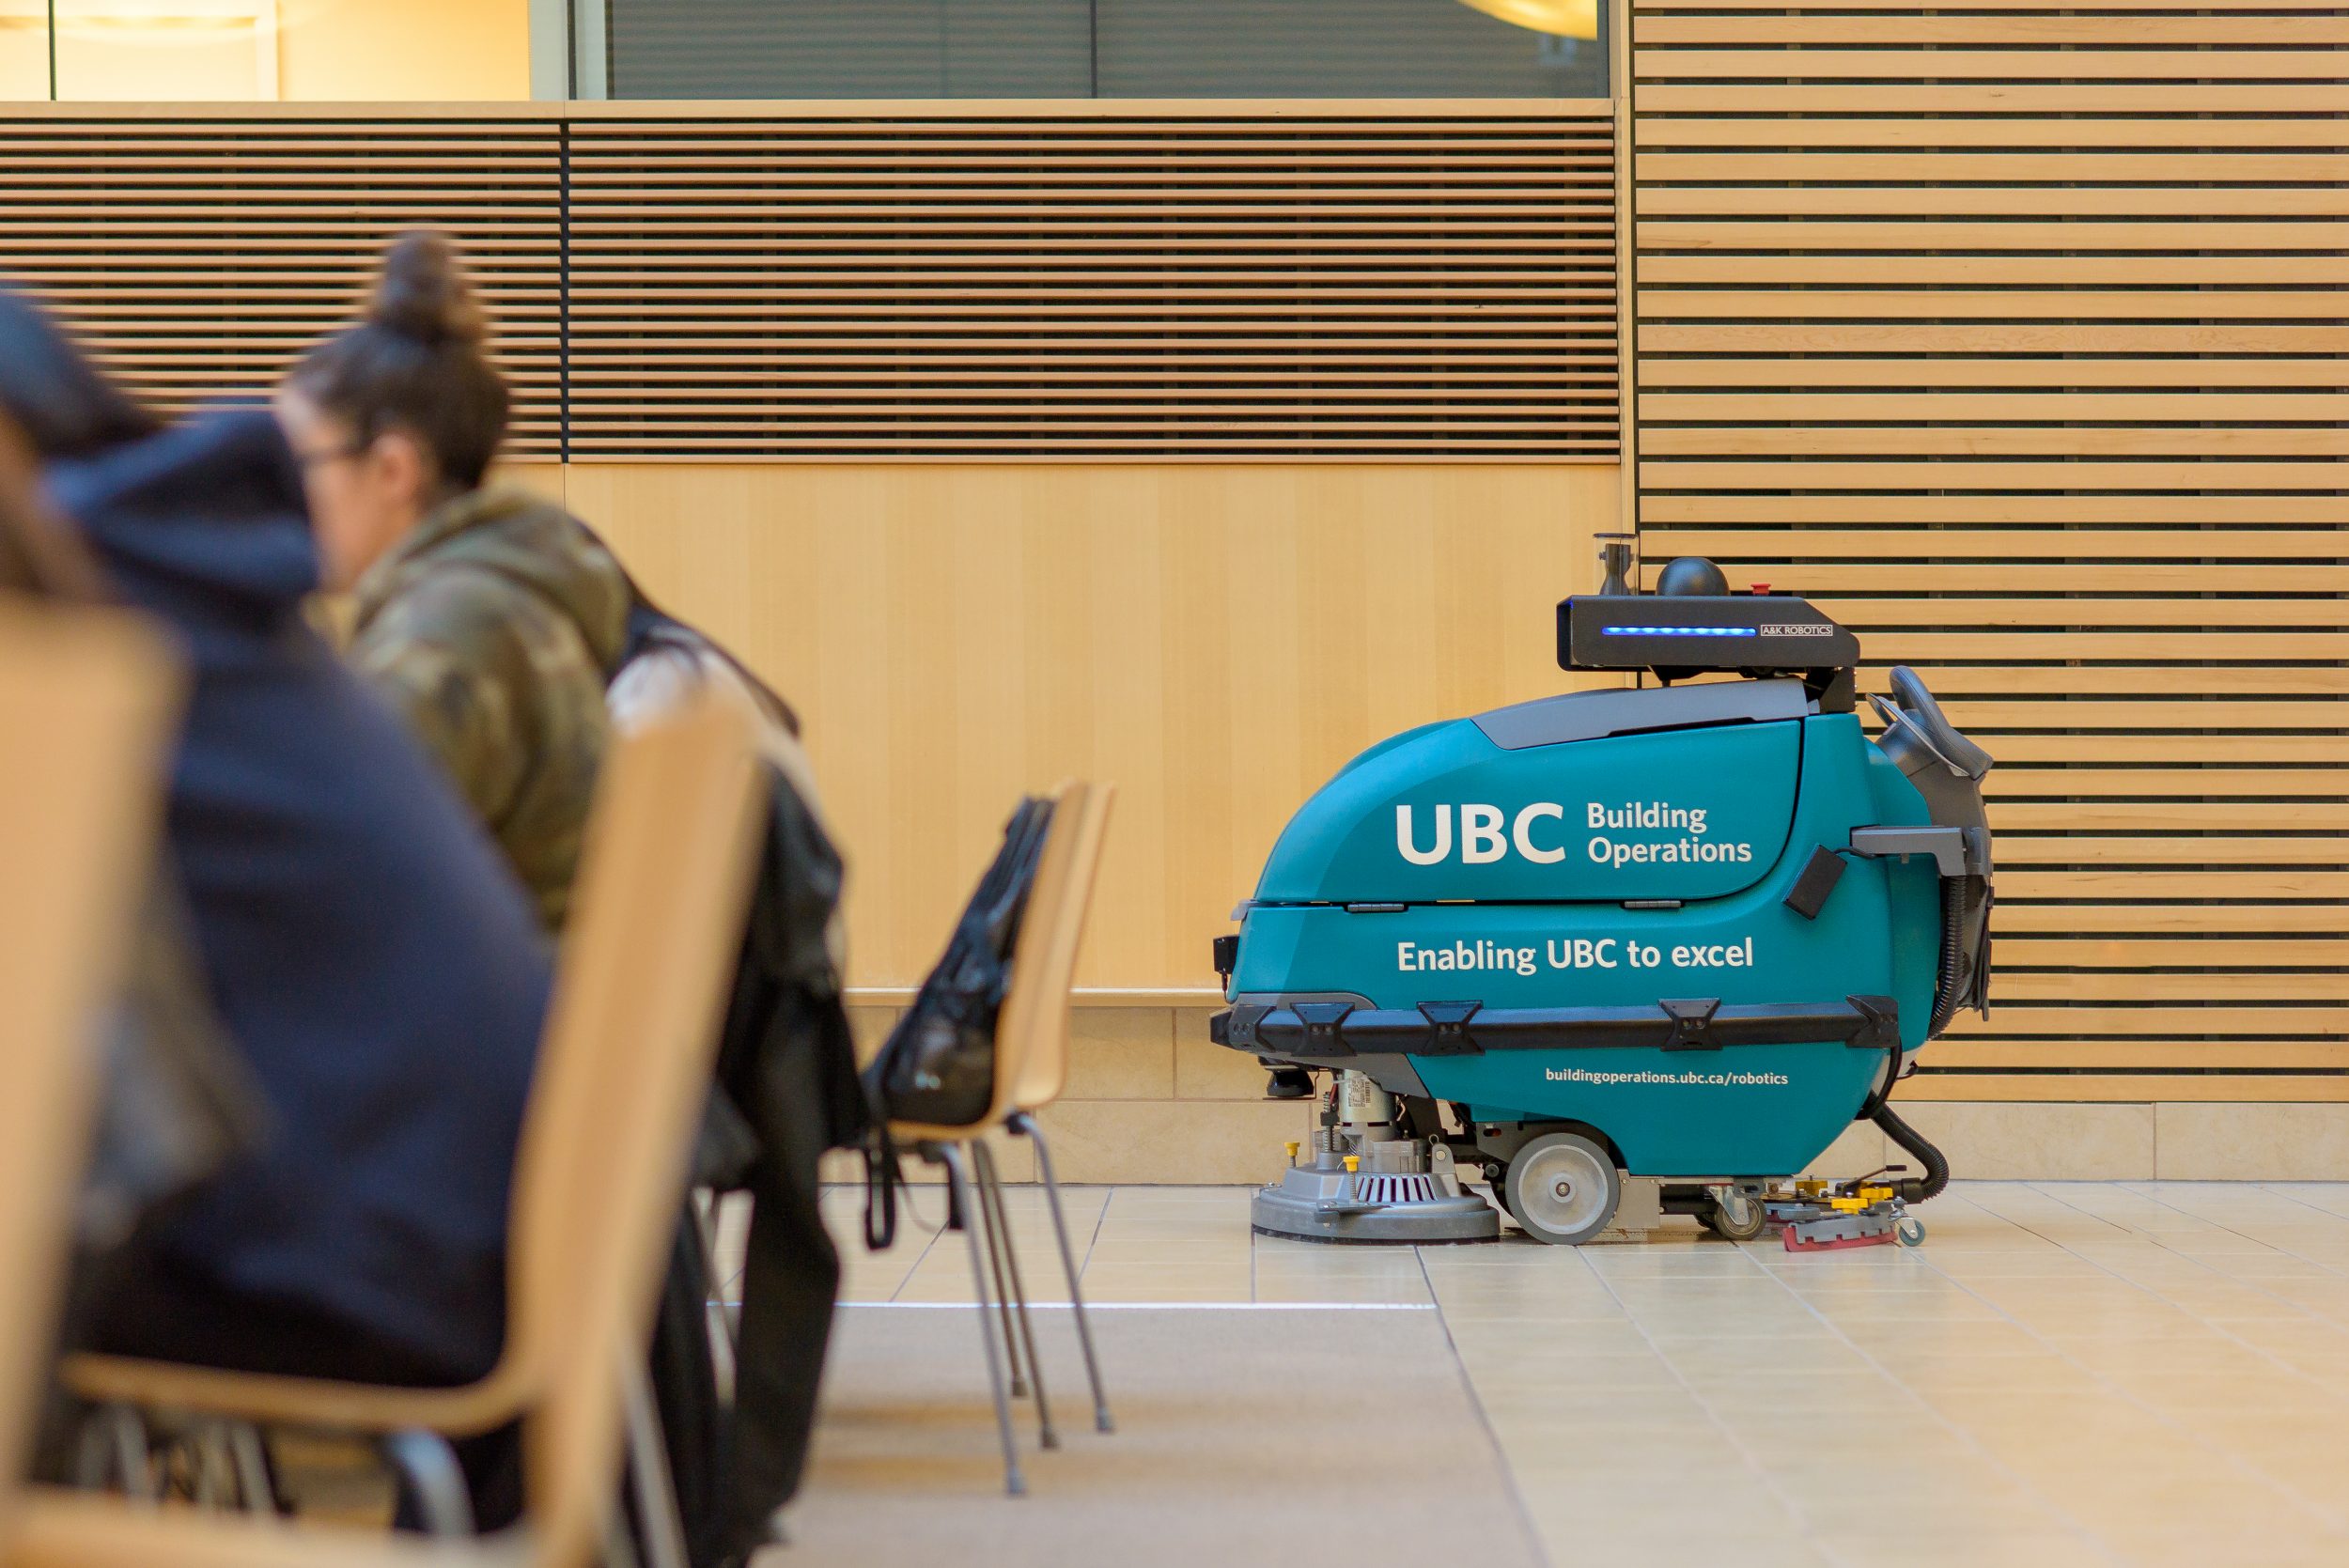 Innovative Floor Cleaning Robots Now Scrubbing The Halls Of Ubc